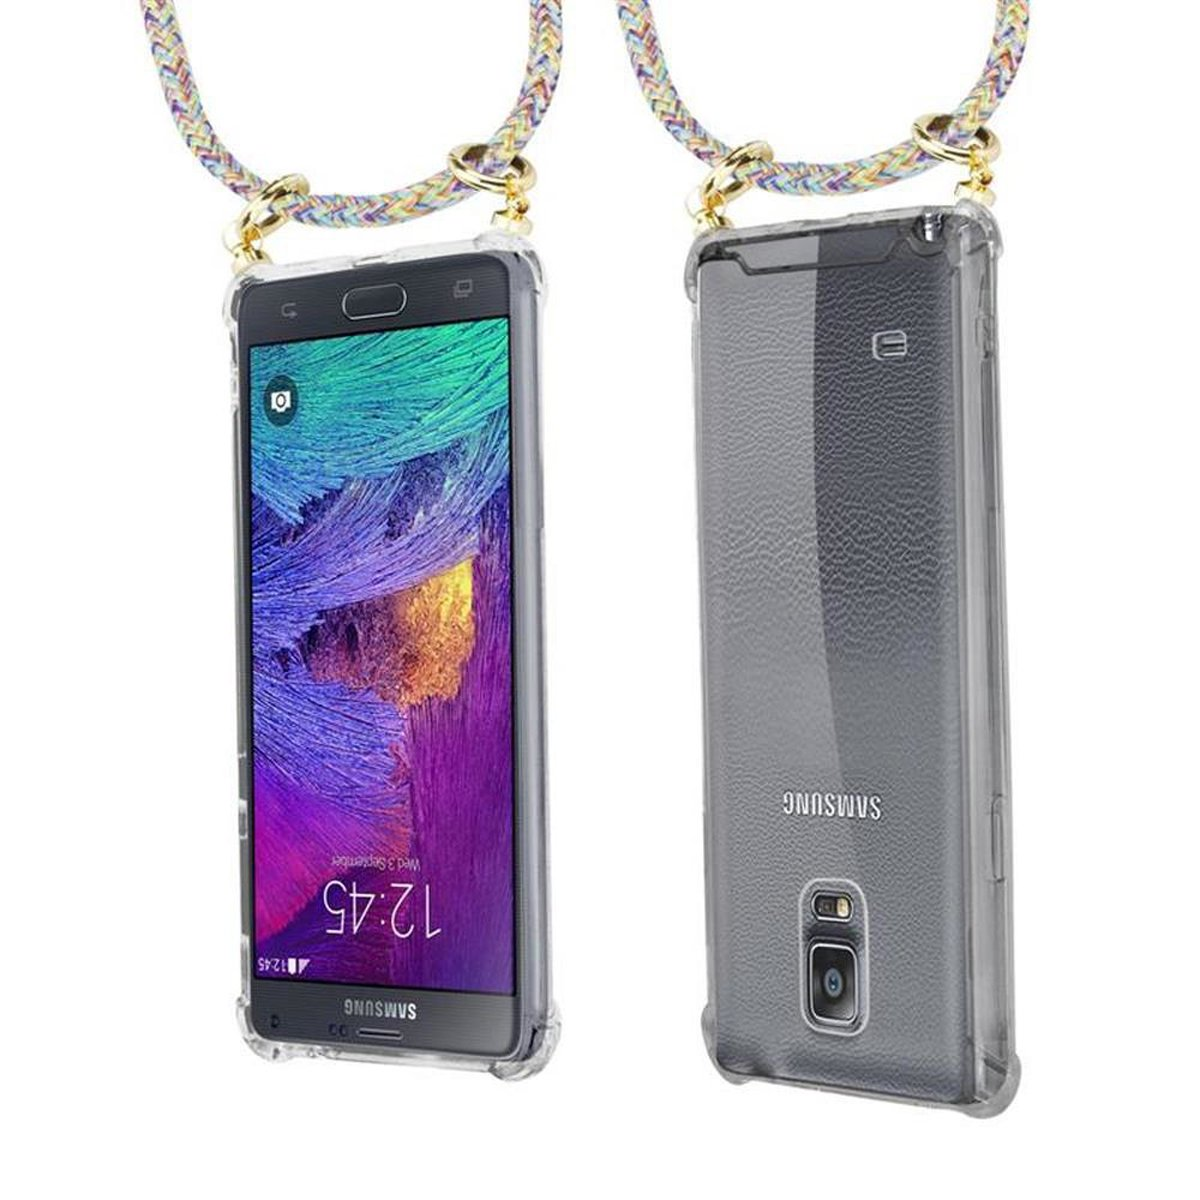 Samsung, CADORABO NOTE Gold Ringen, mit Galaxy RAINBOW 4, Hülle, Kette abnehmbarer Kordel Backcover, Handy und Band